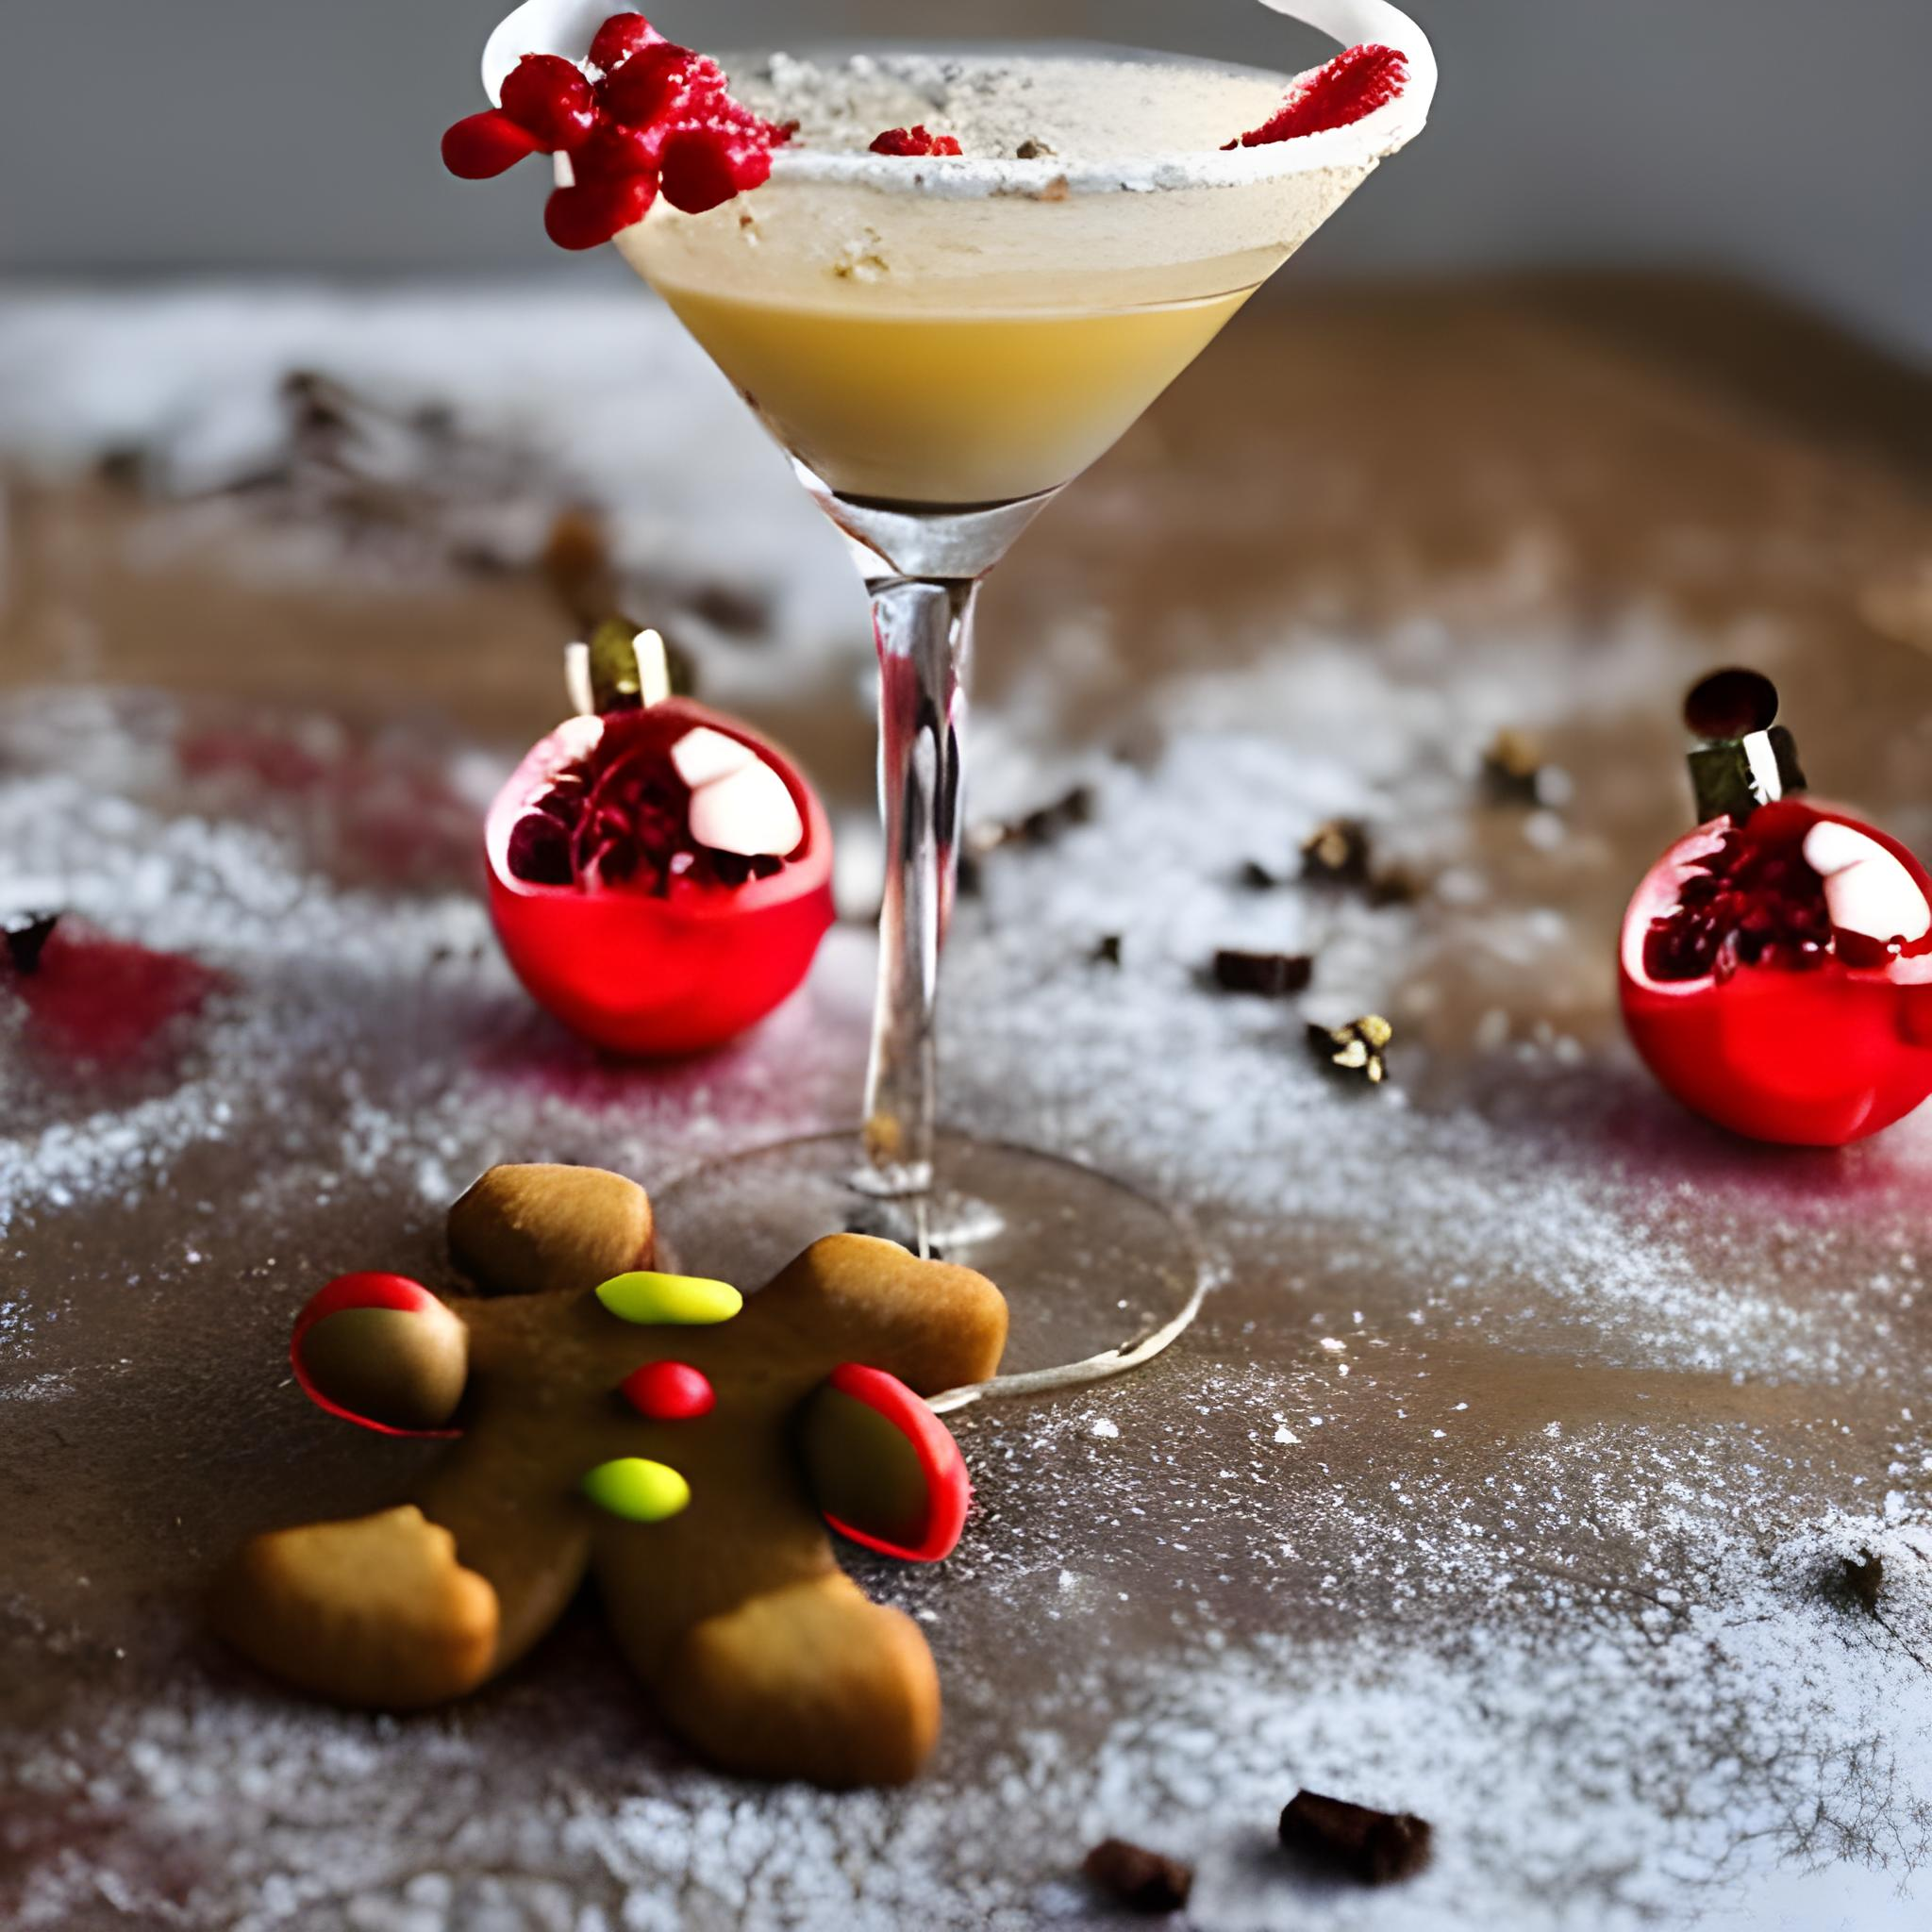 Make a Christmas Treat with this Gingerbread Martini